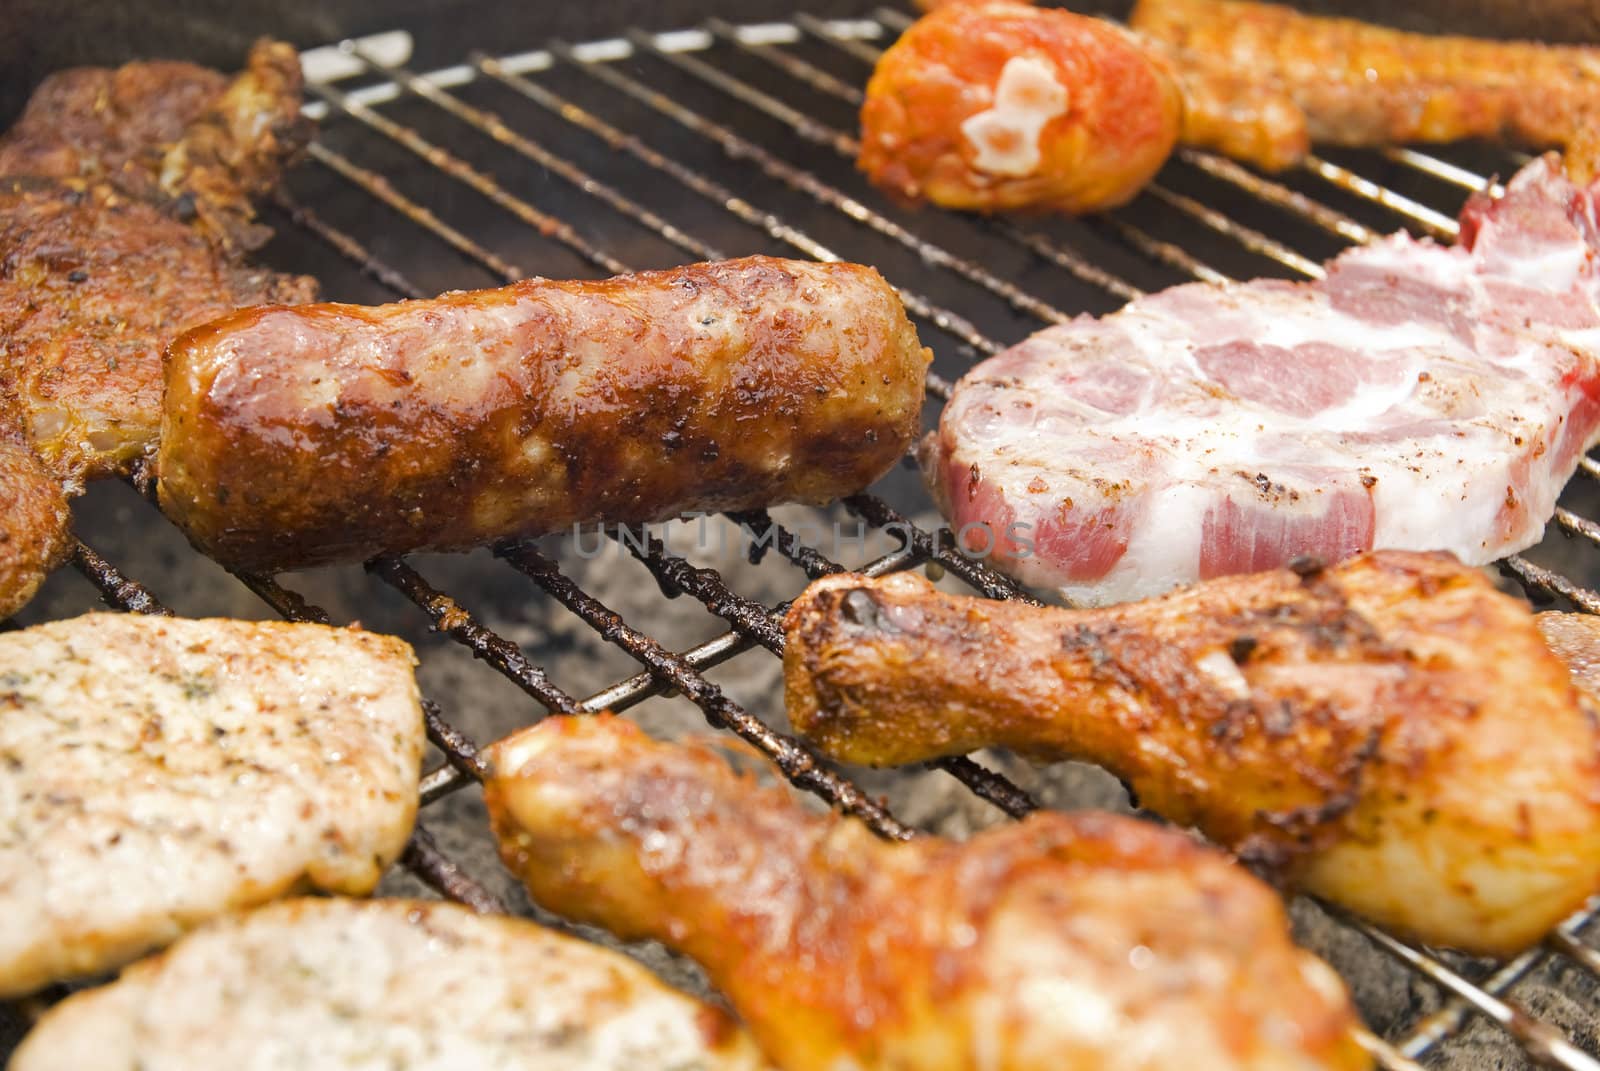 Sausages, beef and other meat on a barbecue